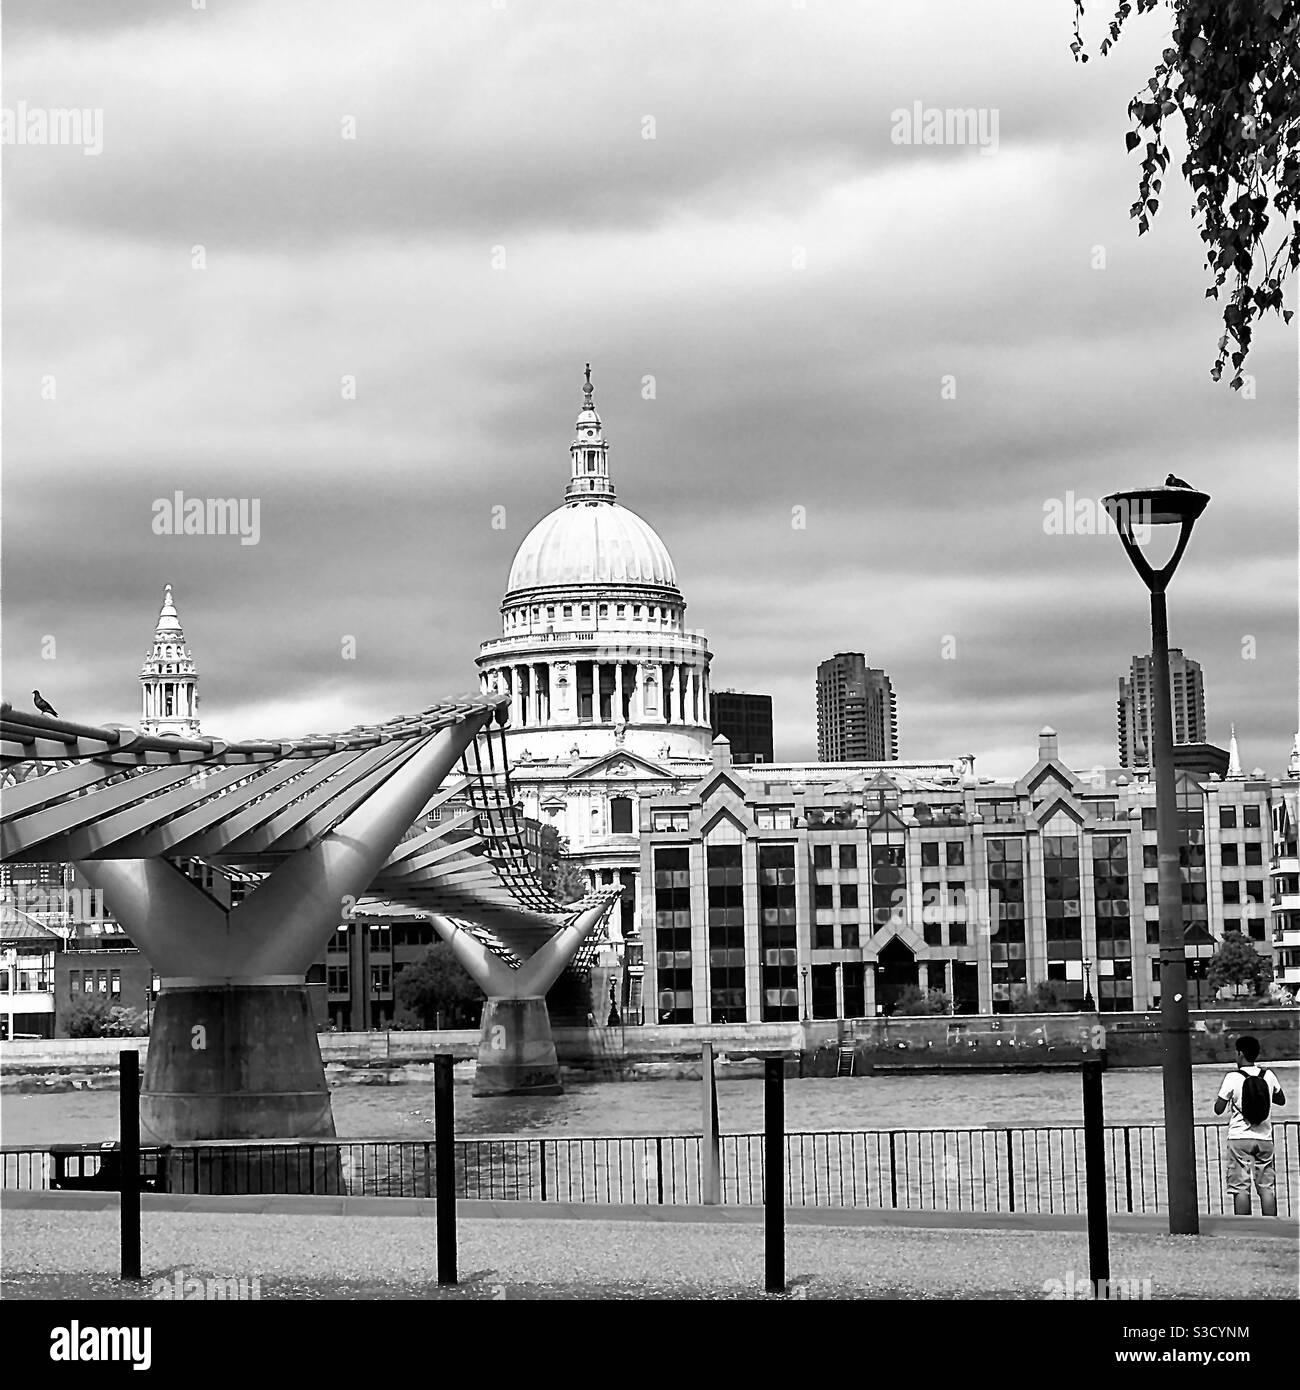 View of St Paul’s Cathedral, London seen from below the Millennium Bridge. Stock Photo